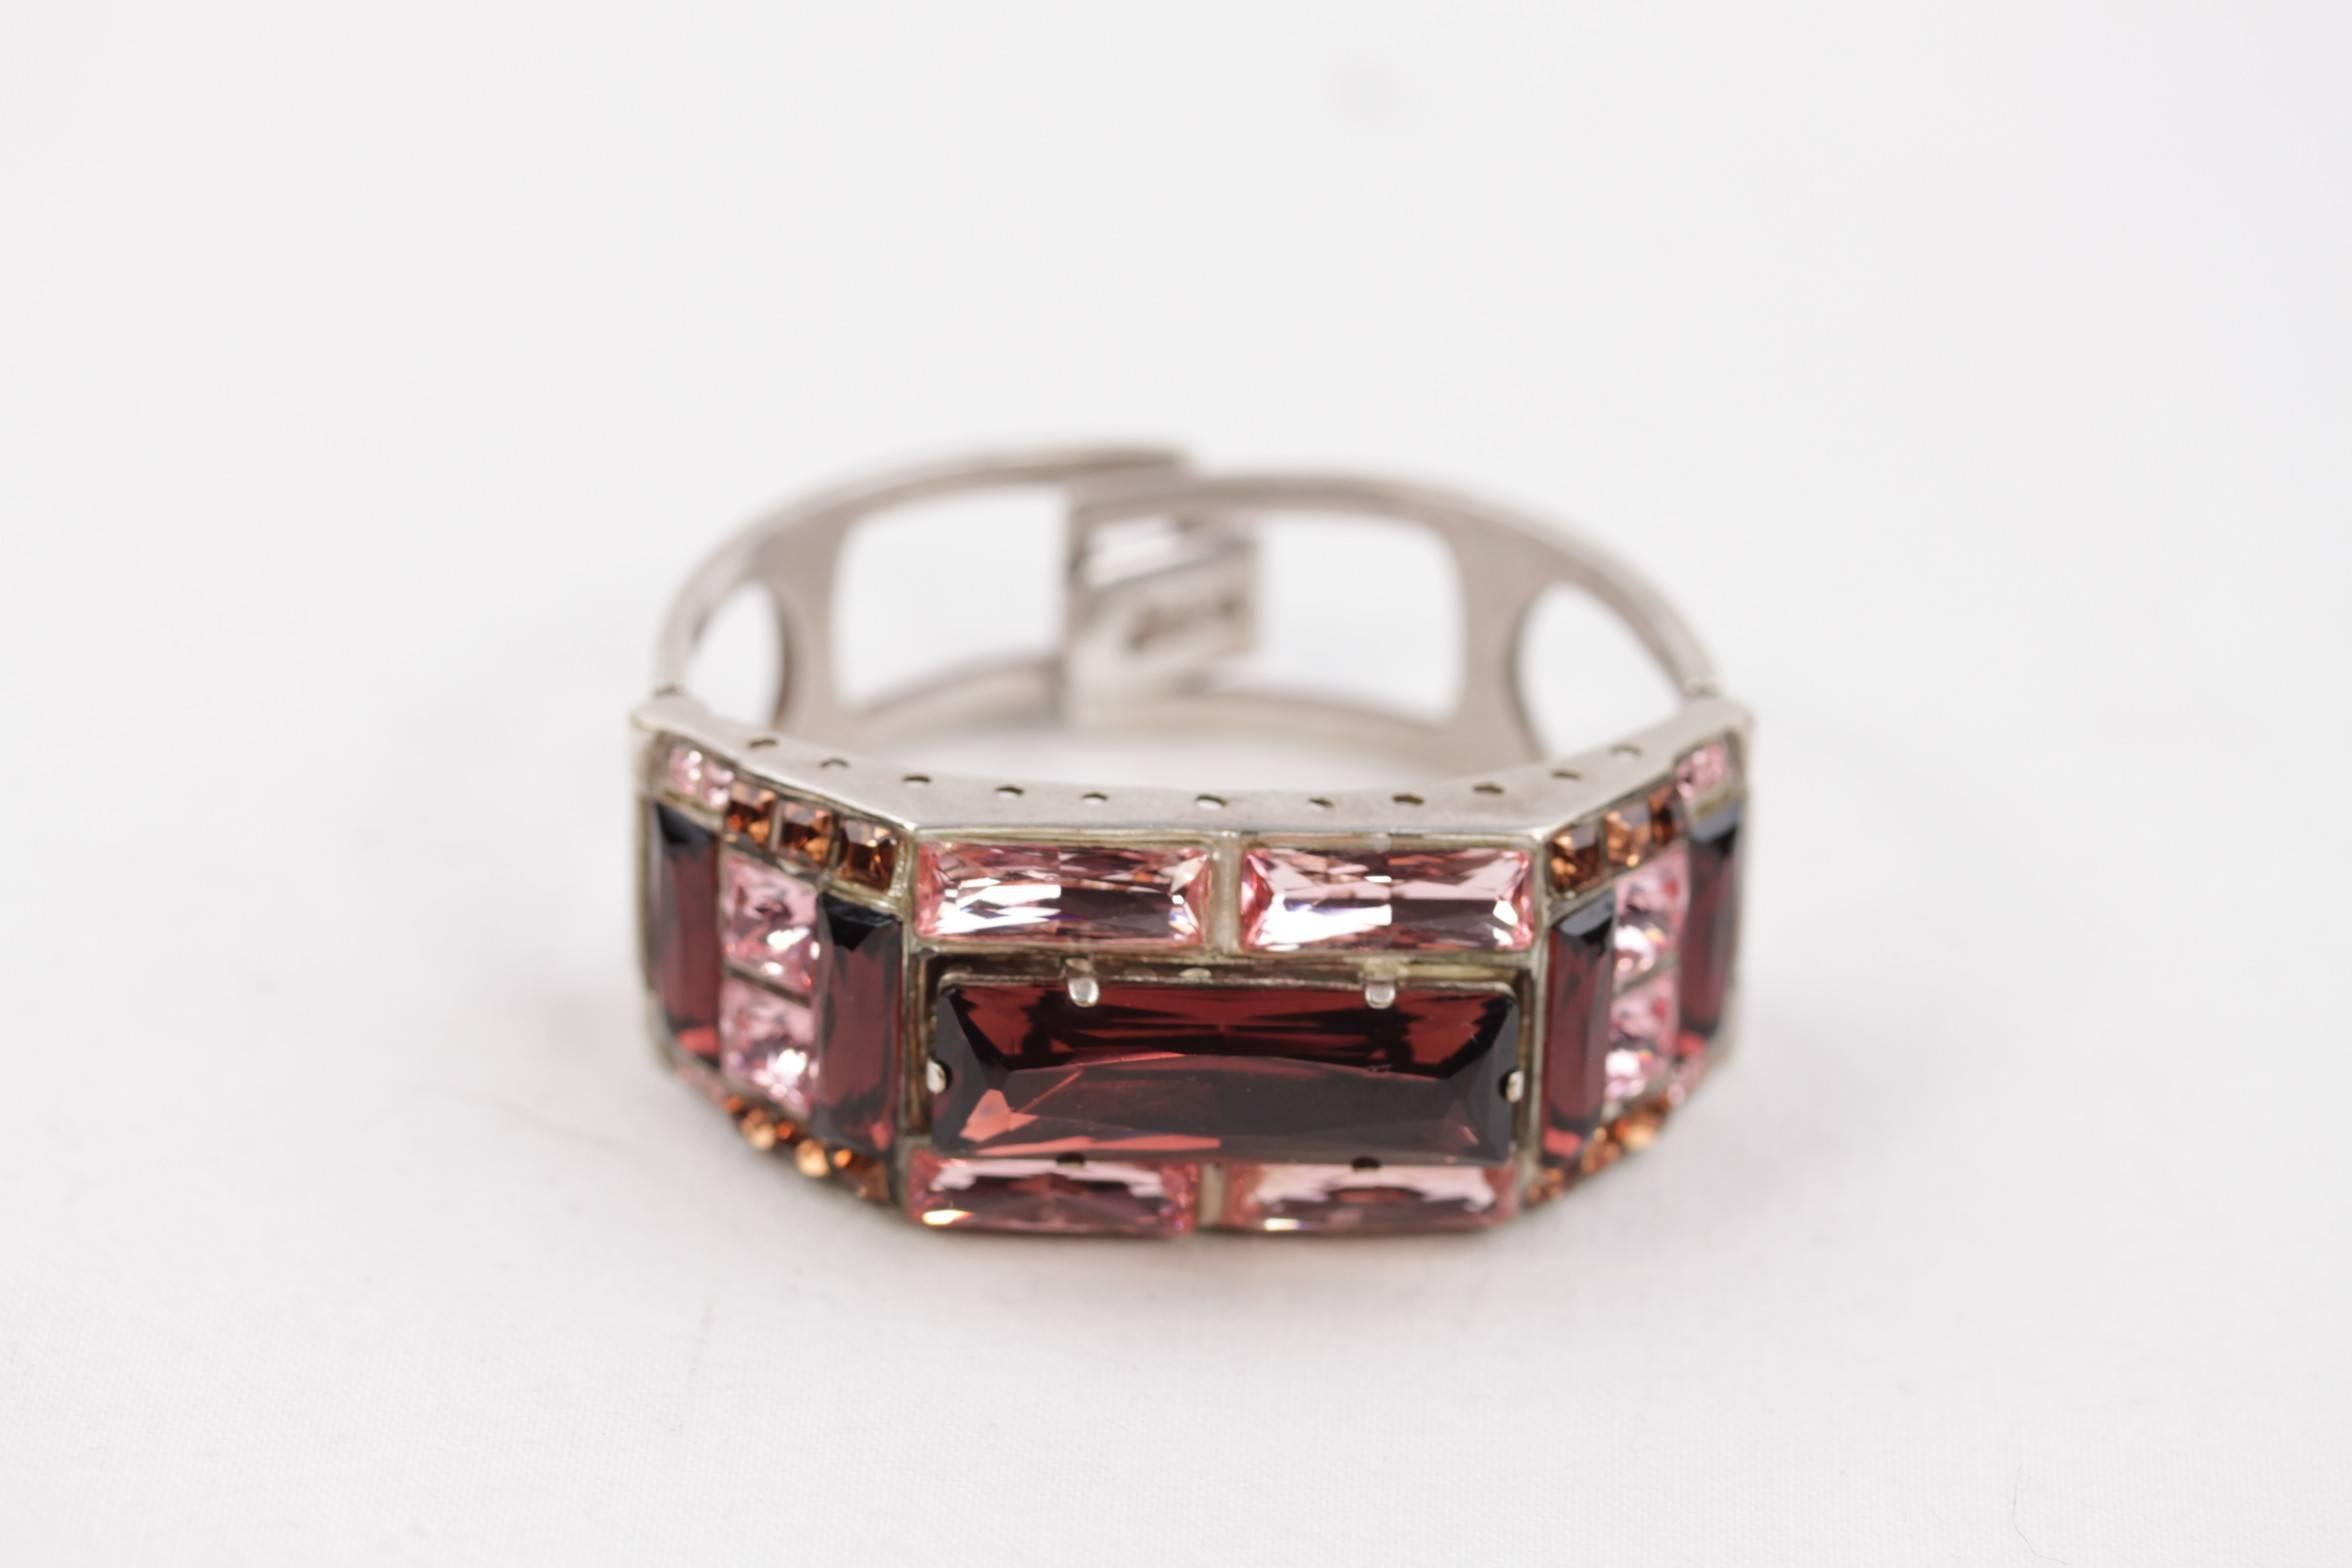 Silver-tone bracelet with pink, burgundy and tan faceted rhinestones by JEAN PAUL GAULTIER

- Clasp closure

- Approx. inner diameter: 2 1/4 inches - 5,7 cm

- Marked 'JEAN PAUL GAULTIER' on the closure

Condition (please read our condition